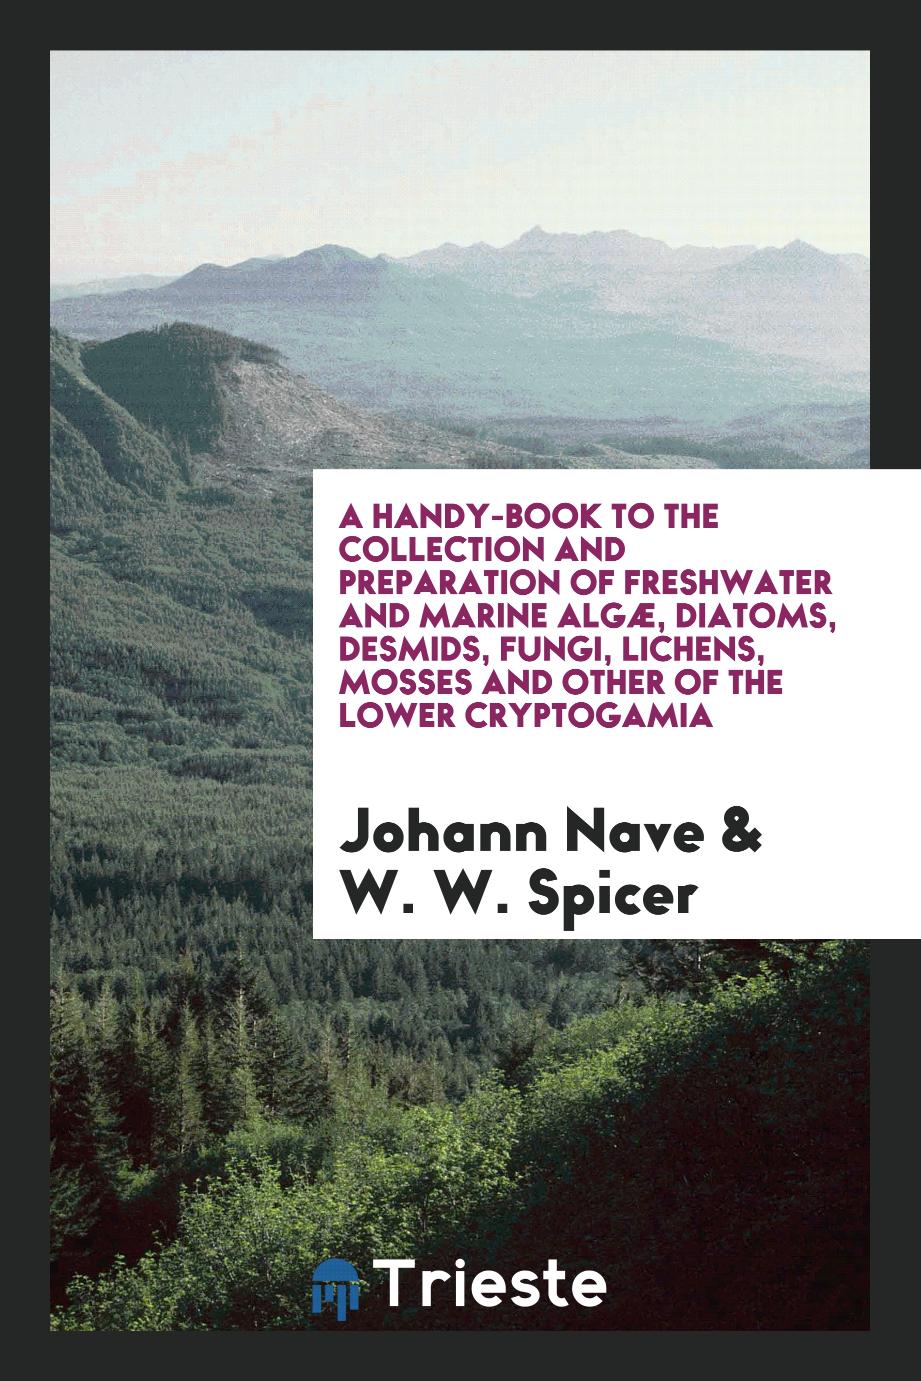 A Handy-Book to the Collection and Preparation of Freshwater and Marine Algæ, Diatoms, Desmids, Fungi, Lichens, Mosses and Other of the Lower Cryptogamia